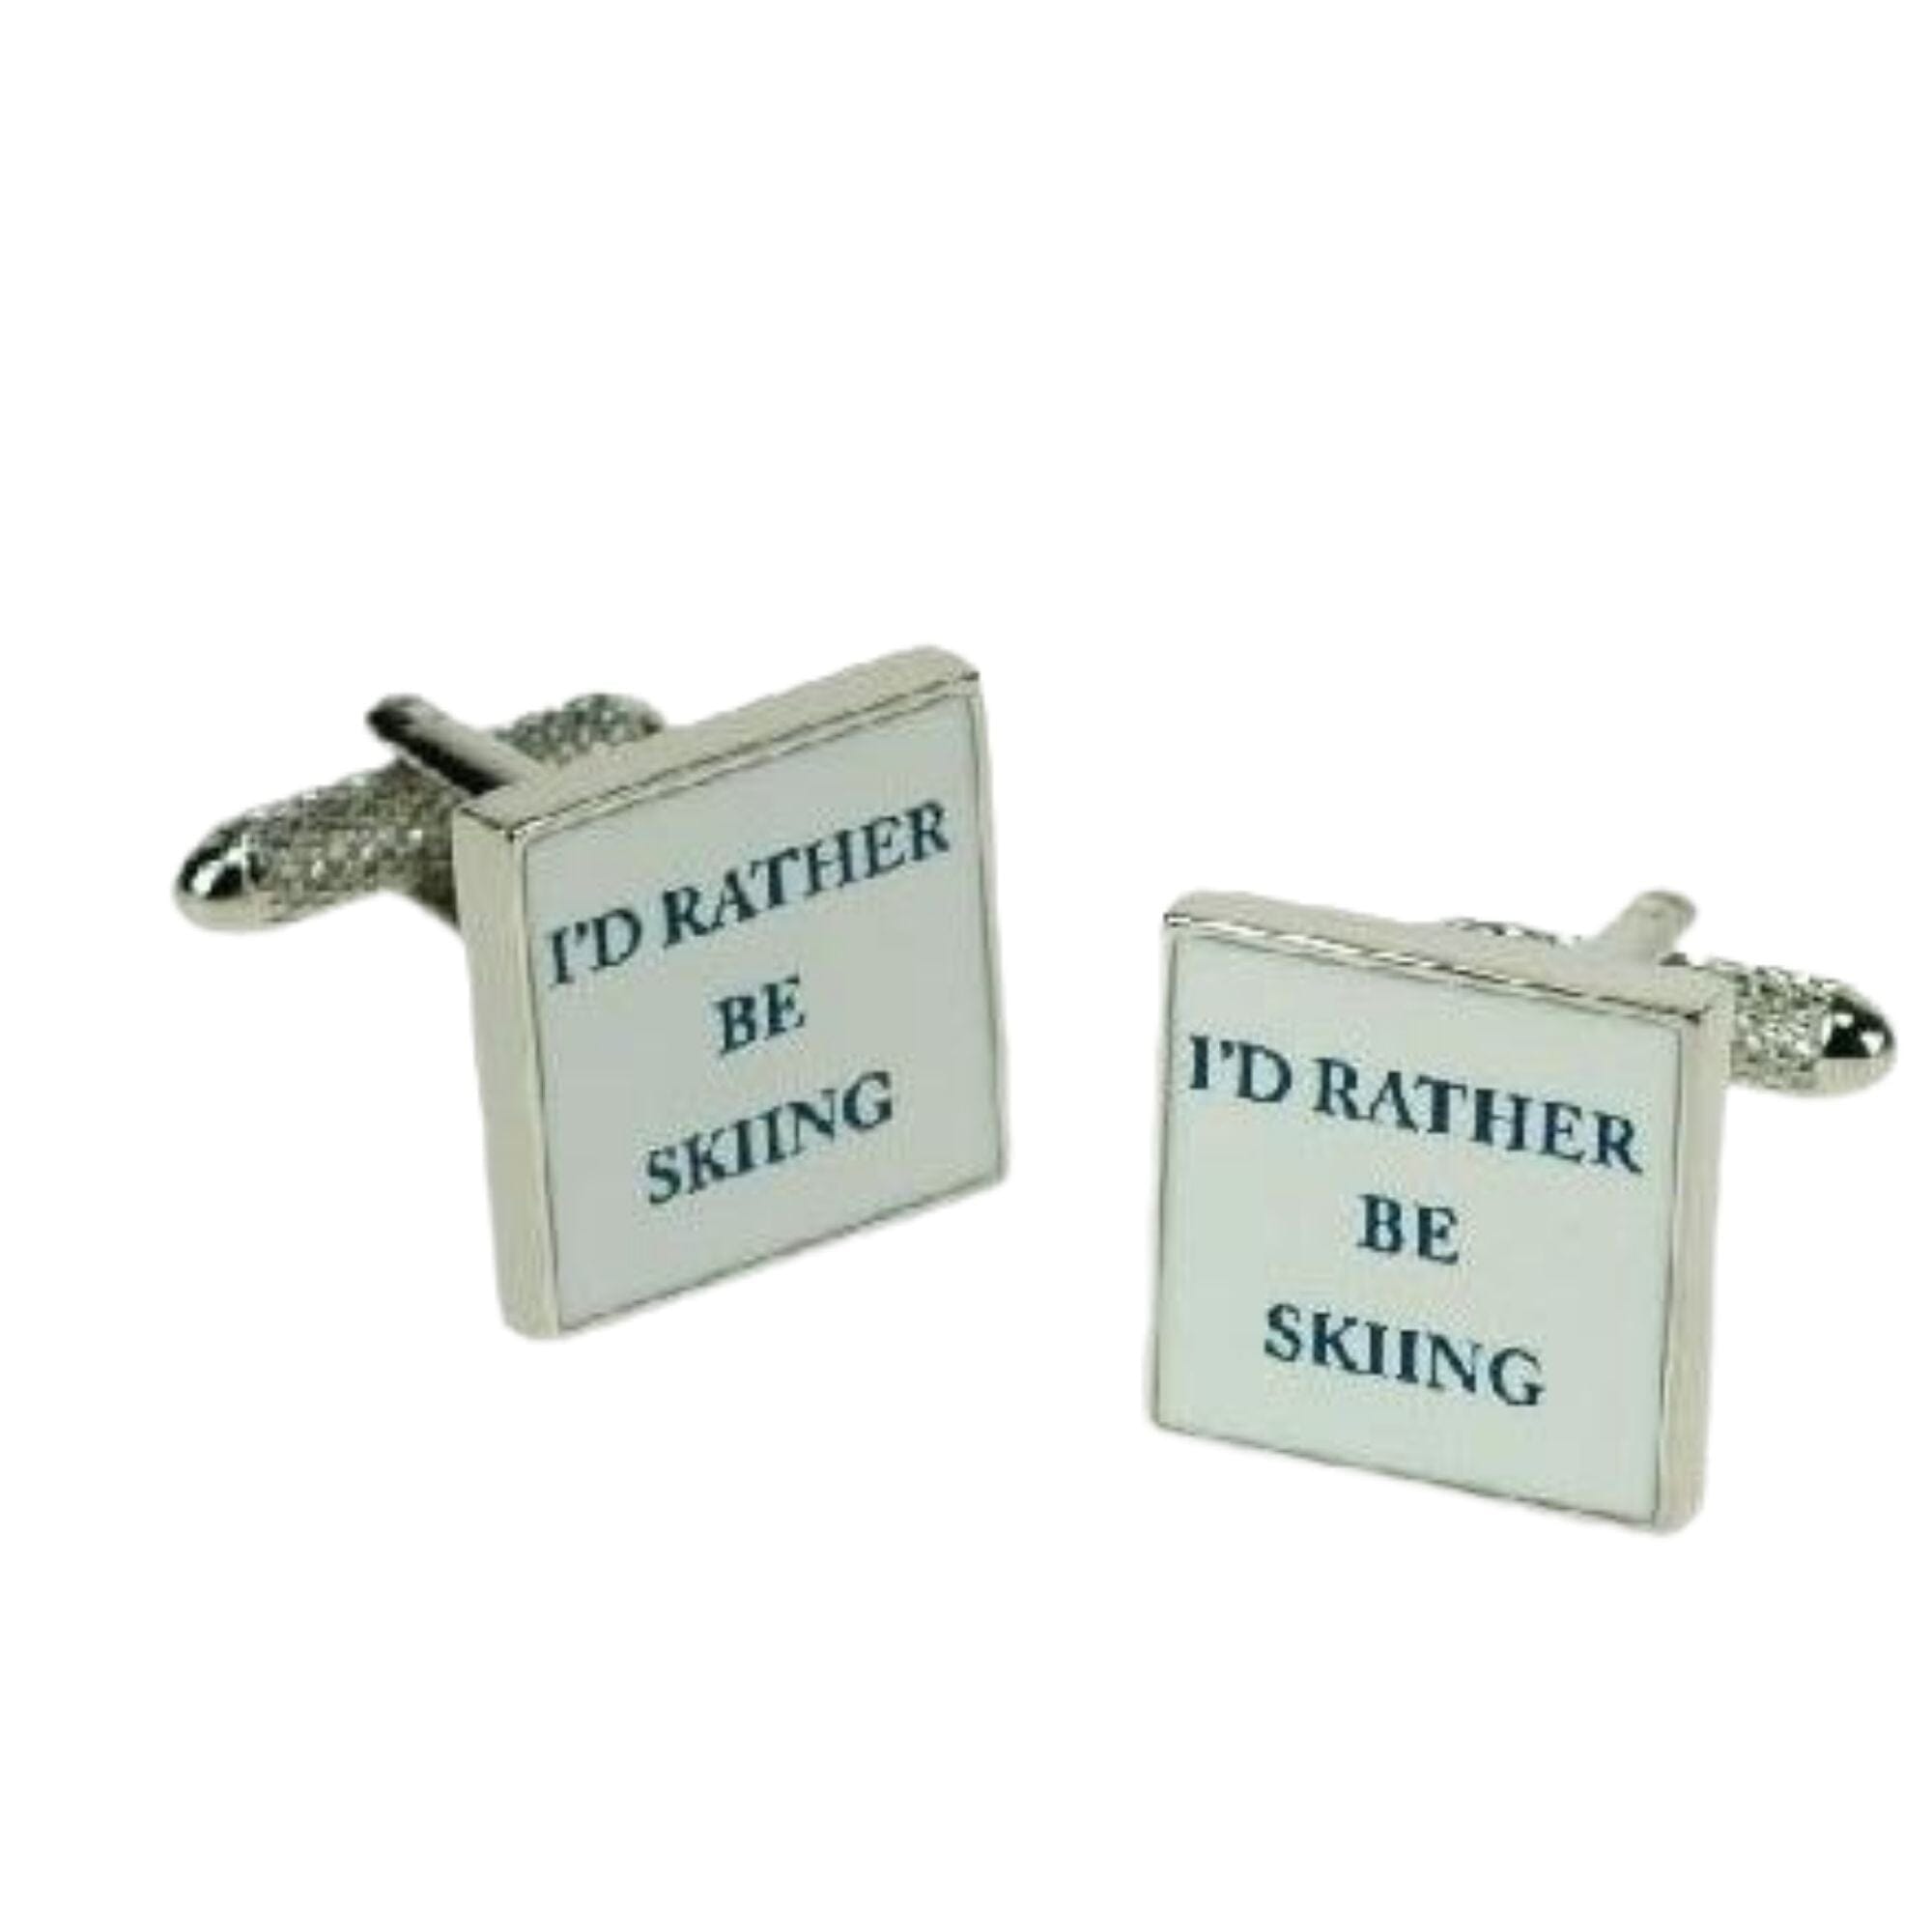 I'd rather be Skiing Cufflinks